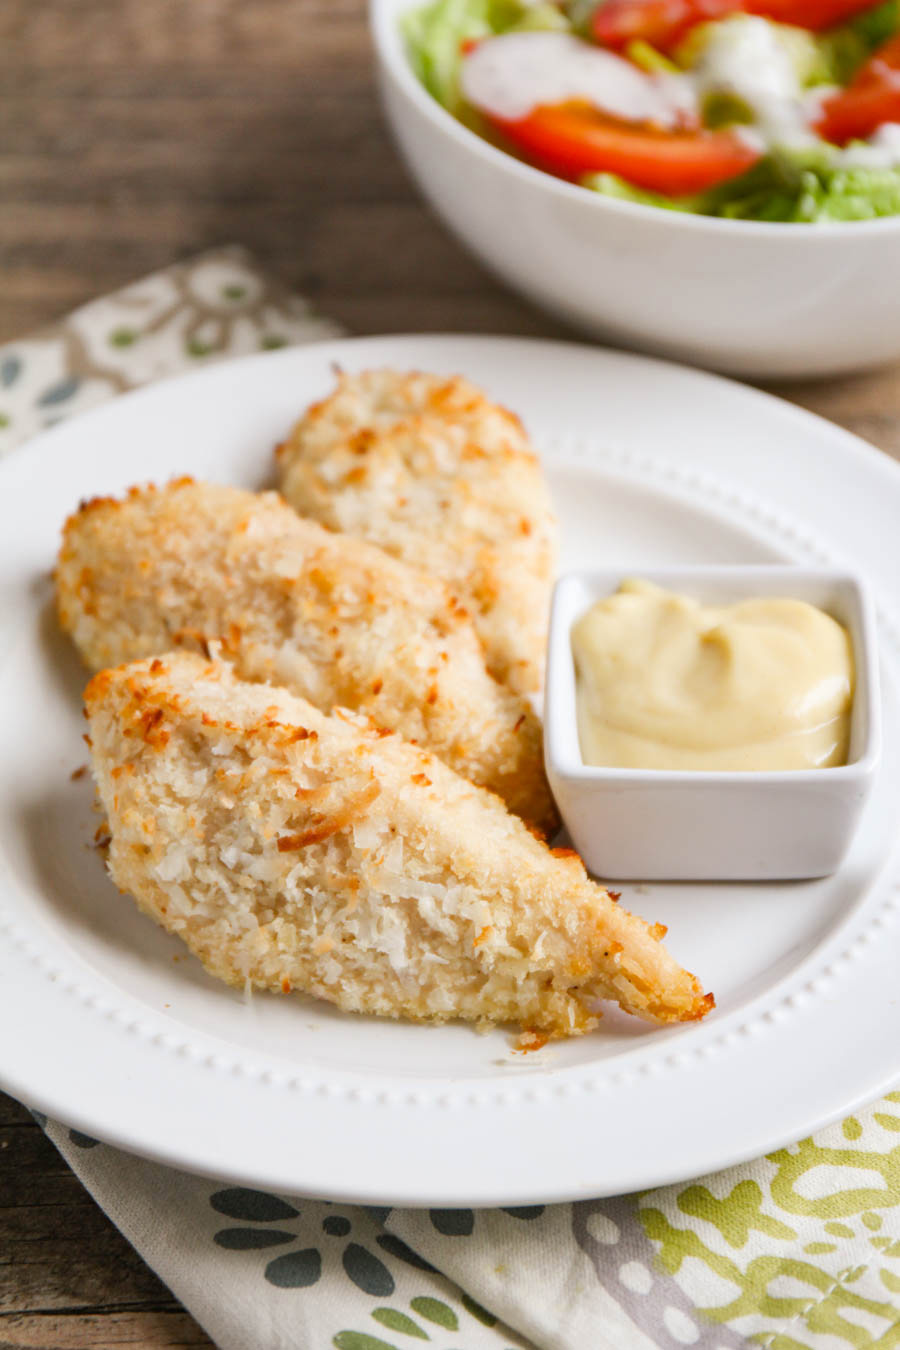 These baked coconut chicken fingers are the perfect combination of savory and sweet, and so delicious!